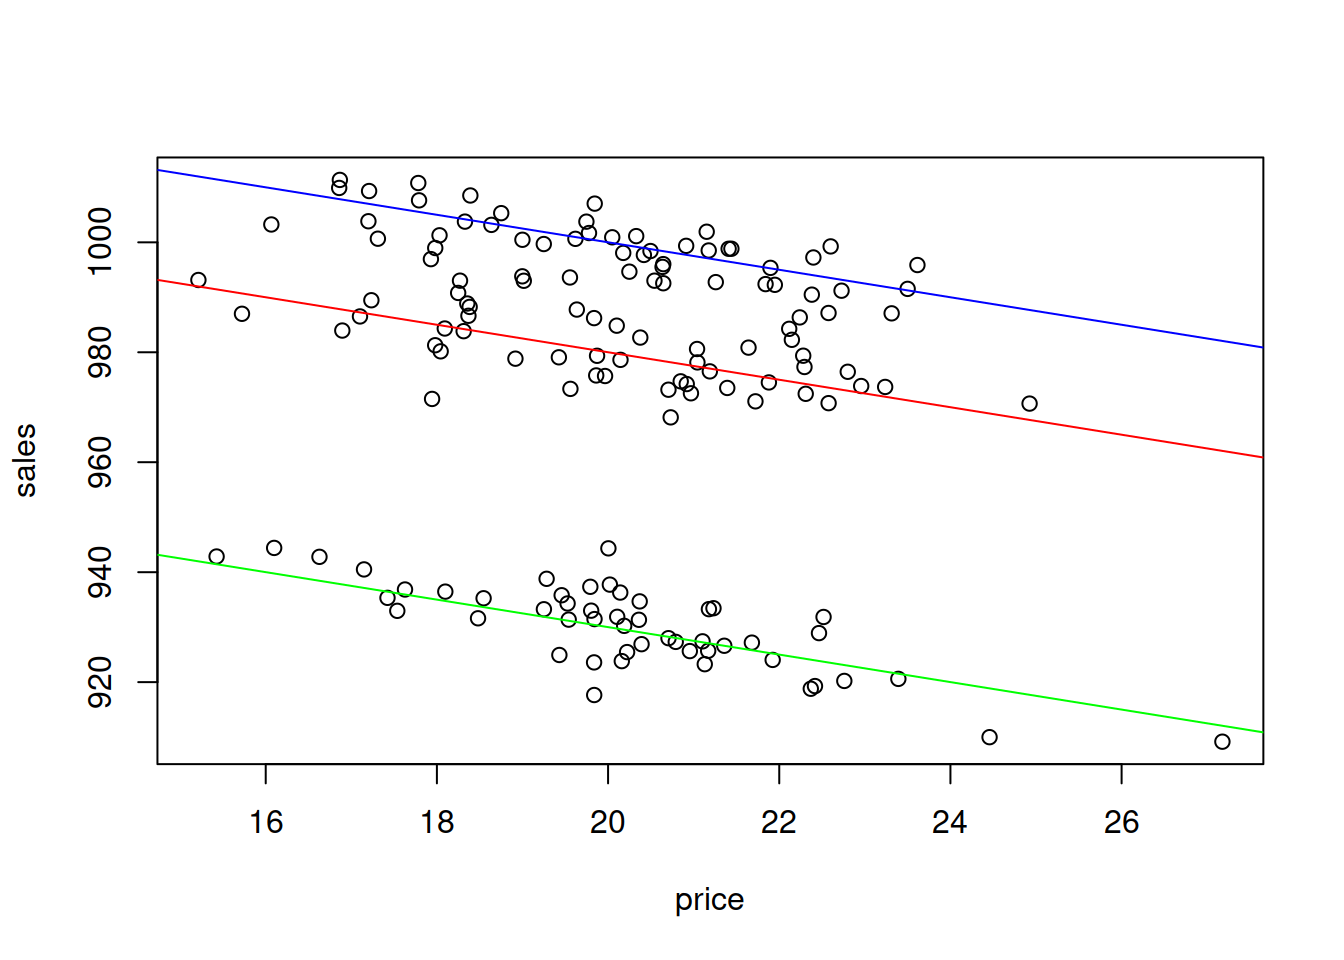 Scatterplot of Sales vs Price of t-shirts of different colour.